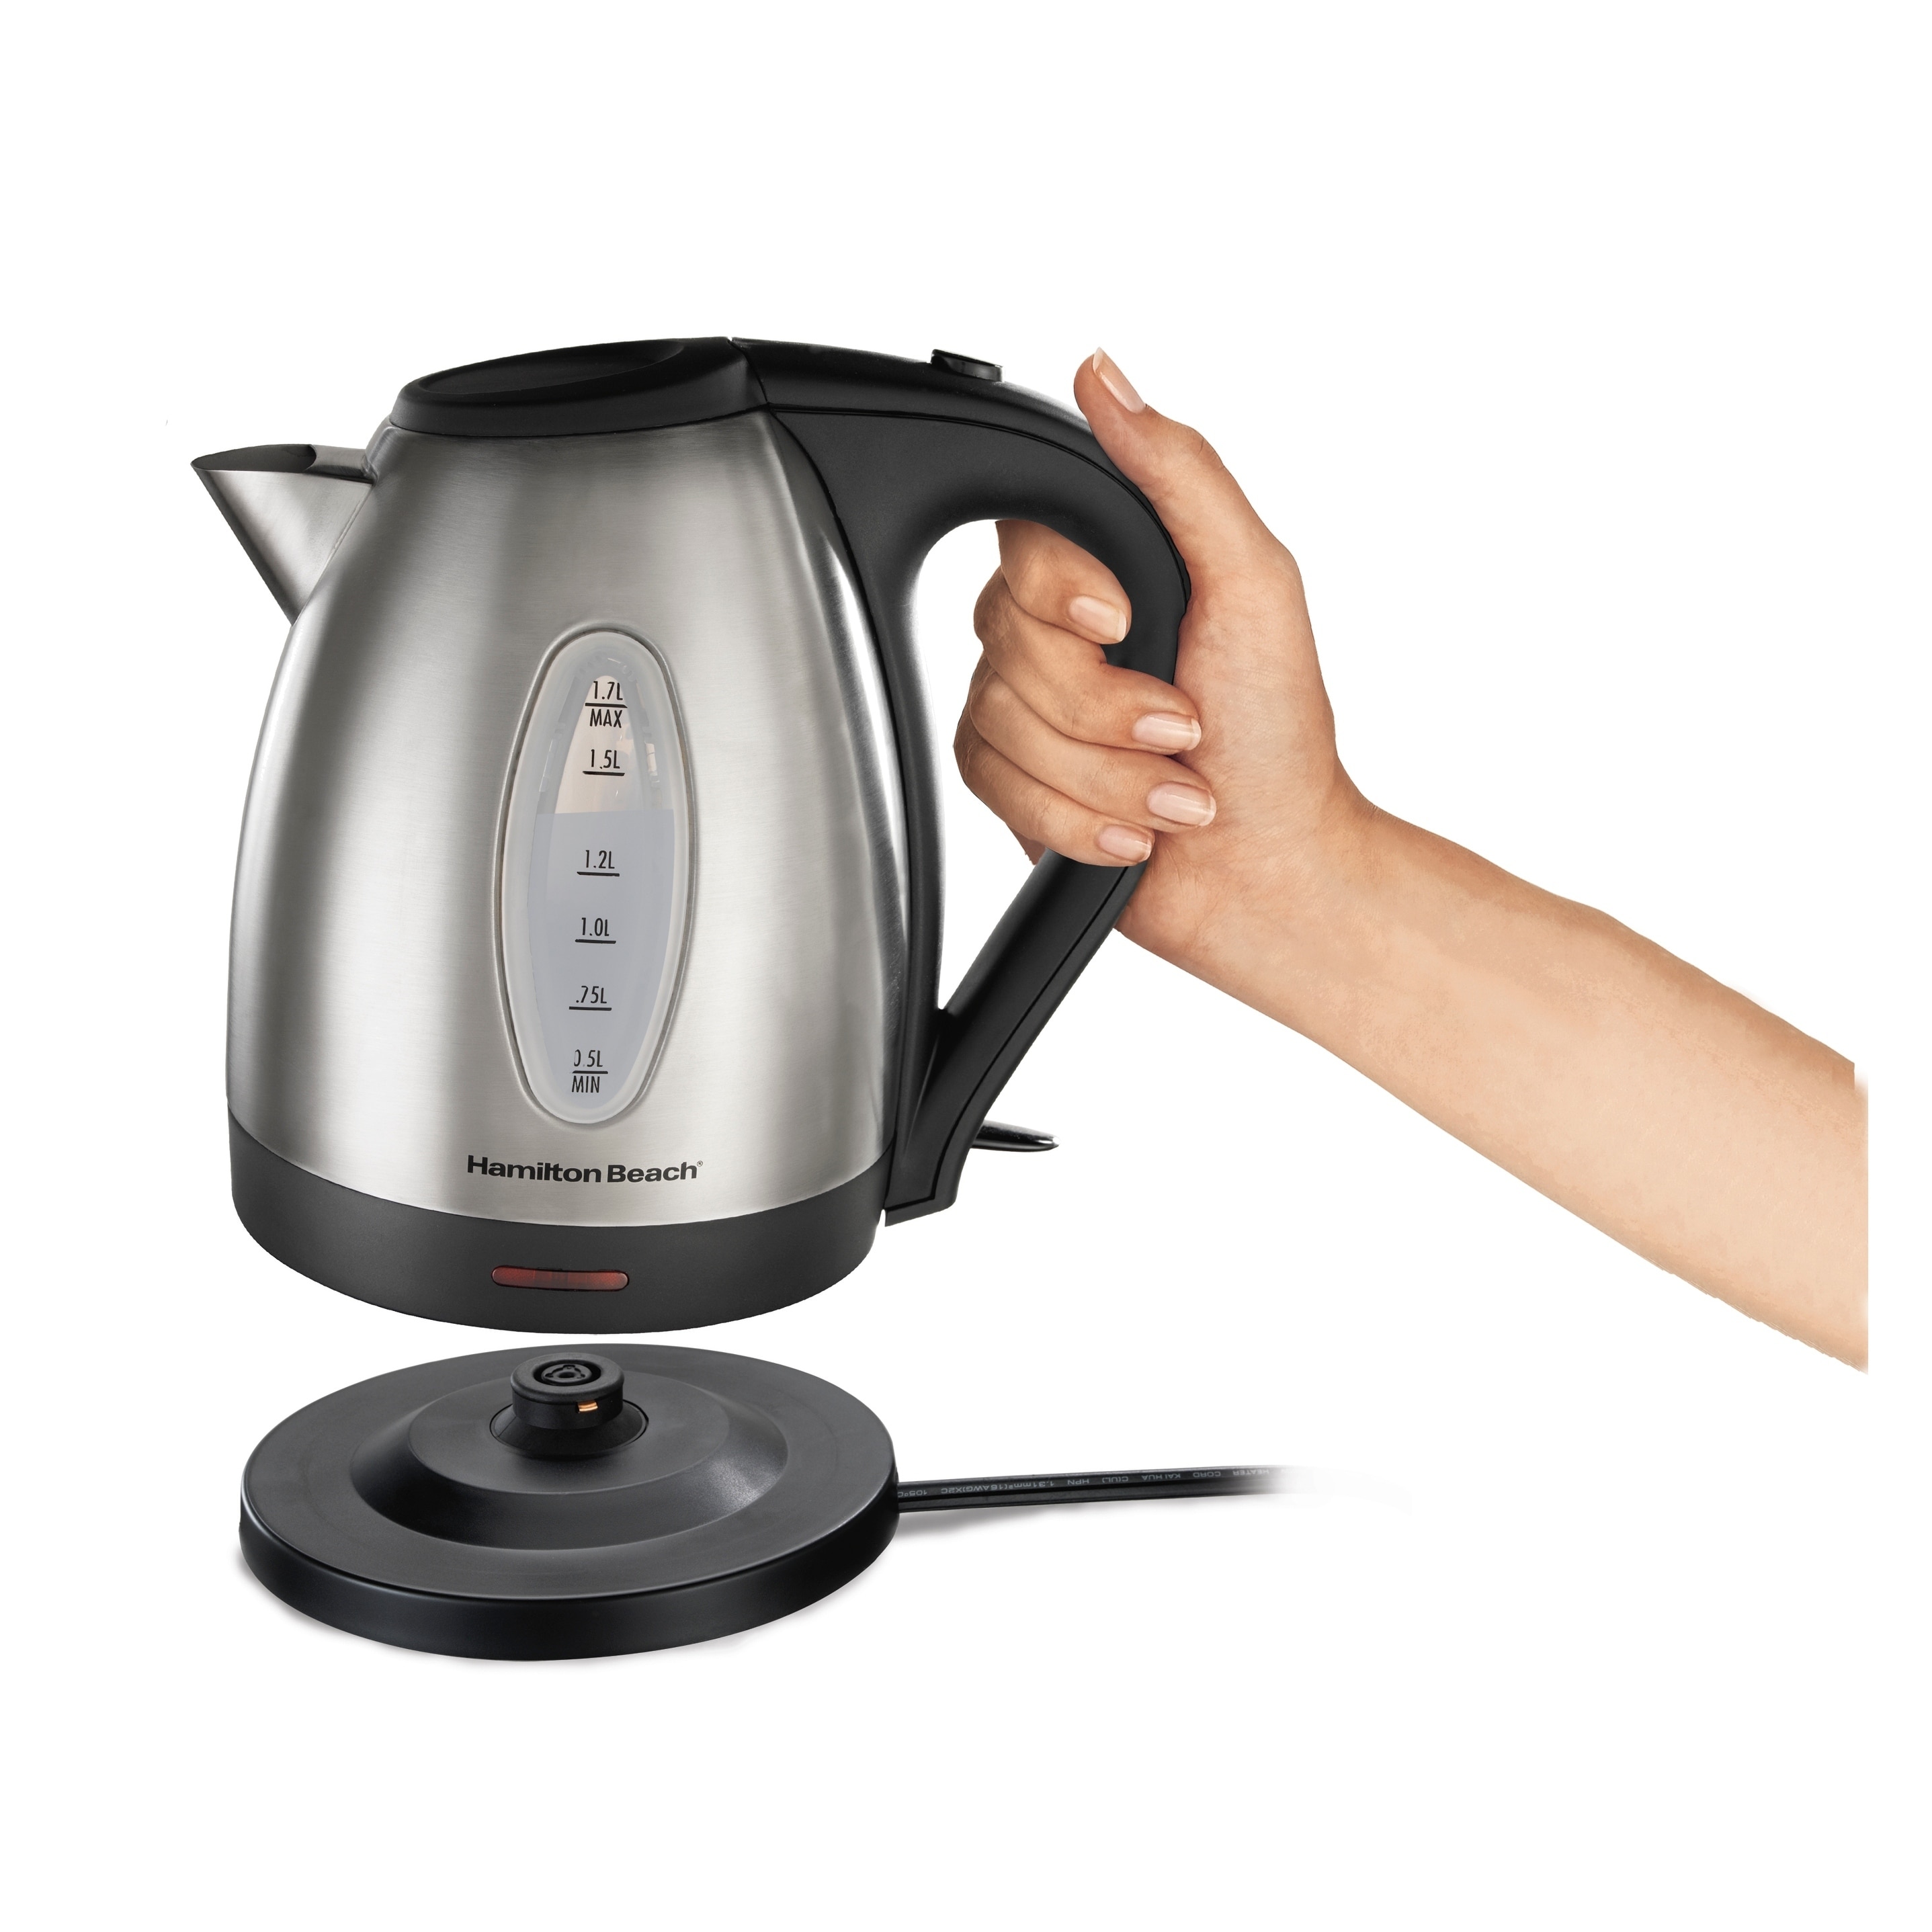 Elite Gourmet 1.2L Cool-Touch SS Electric Kette 